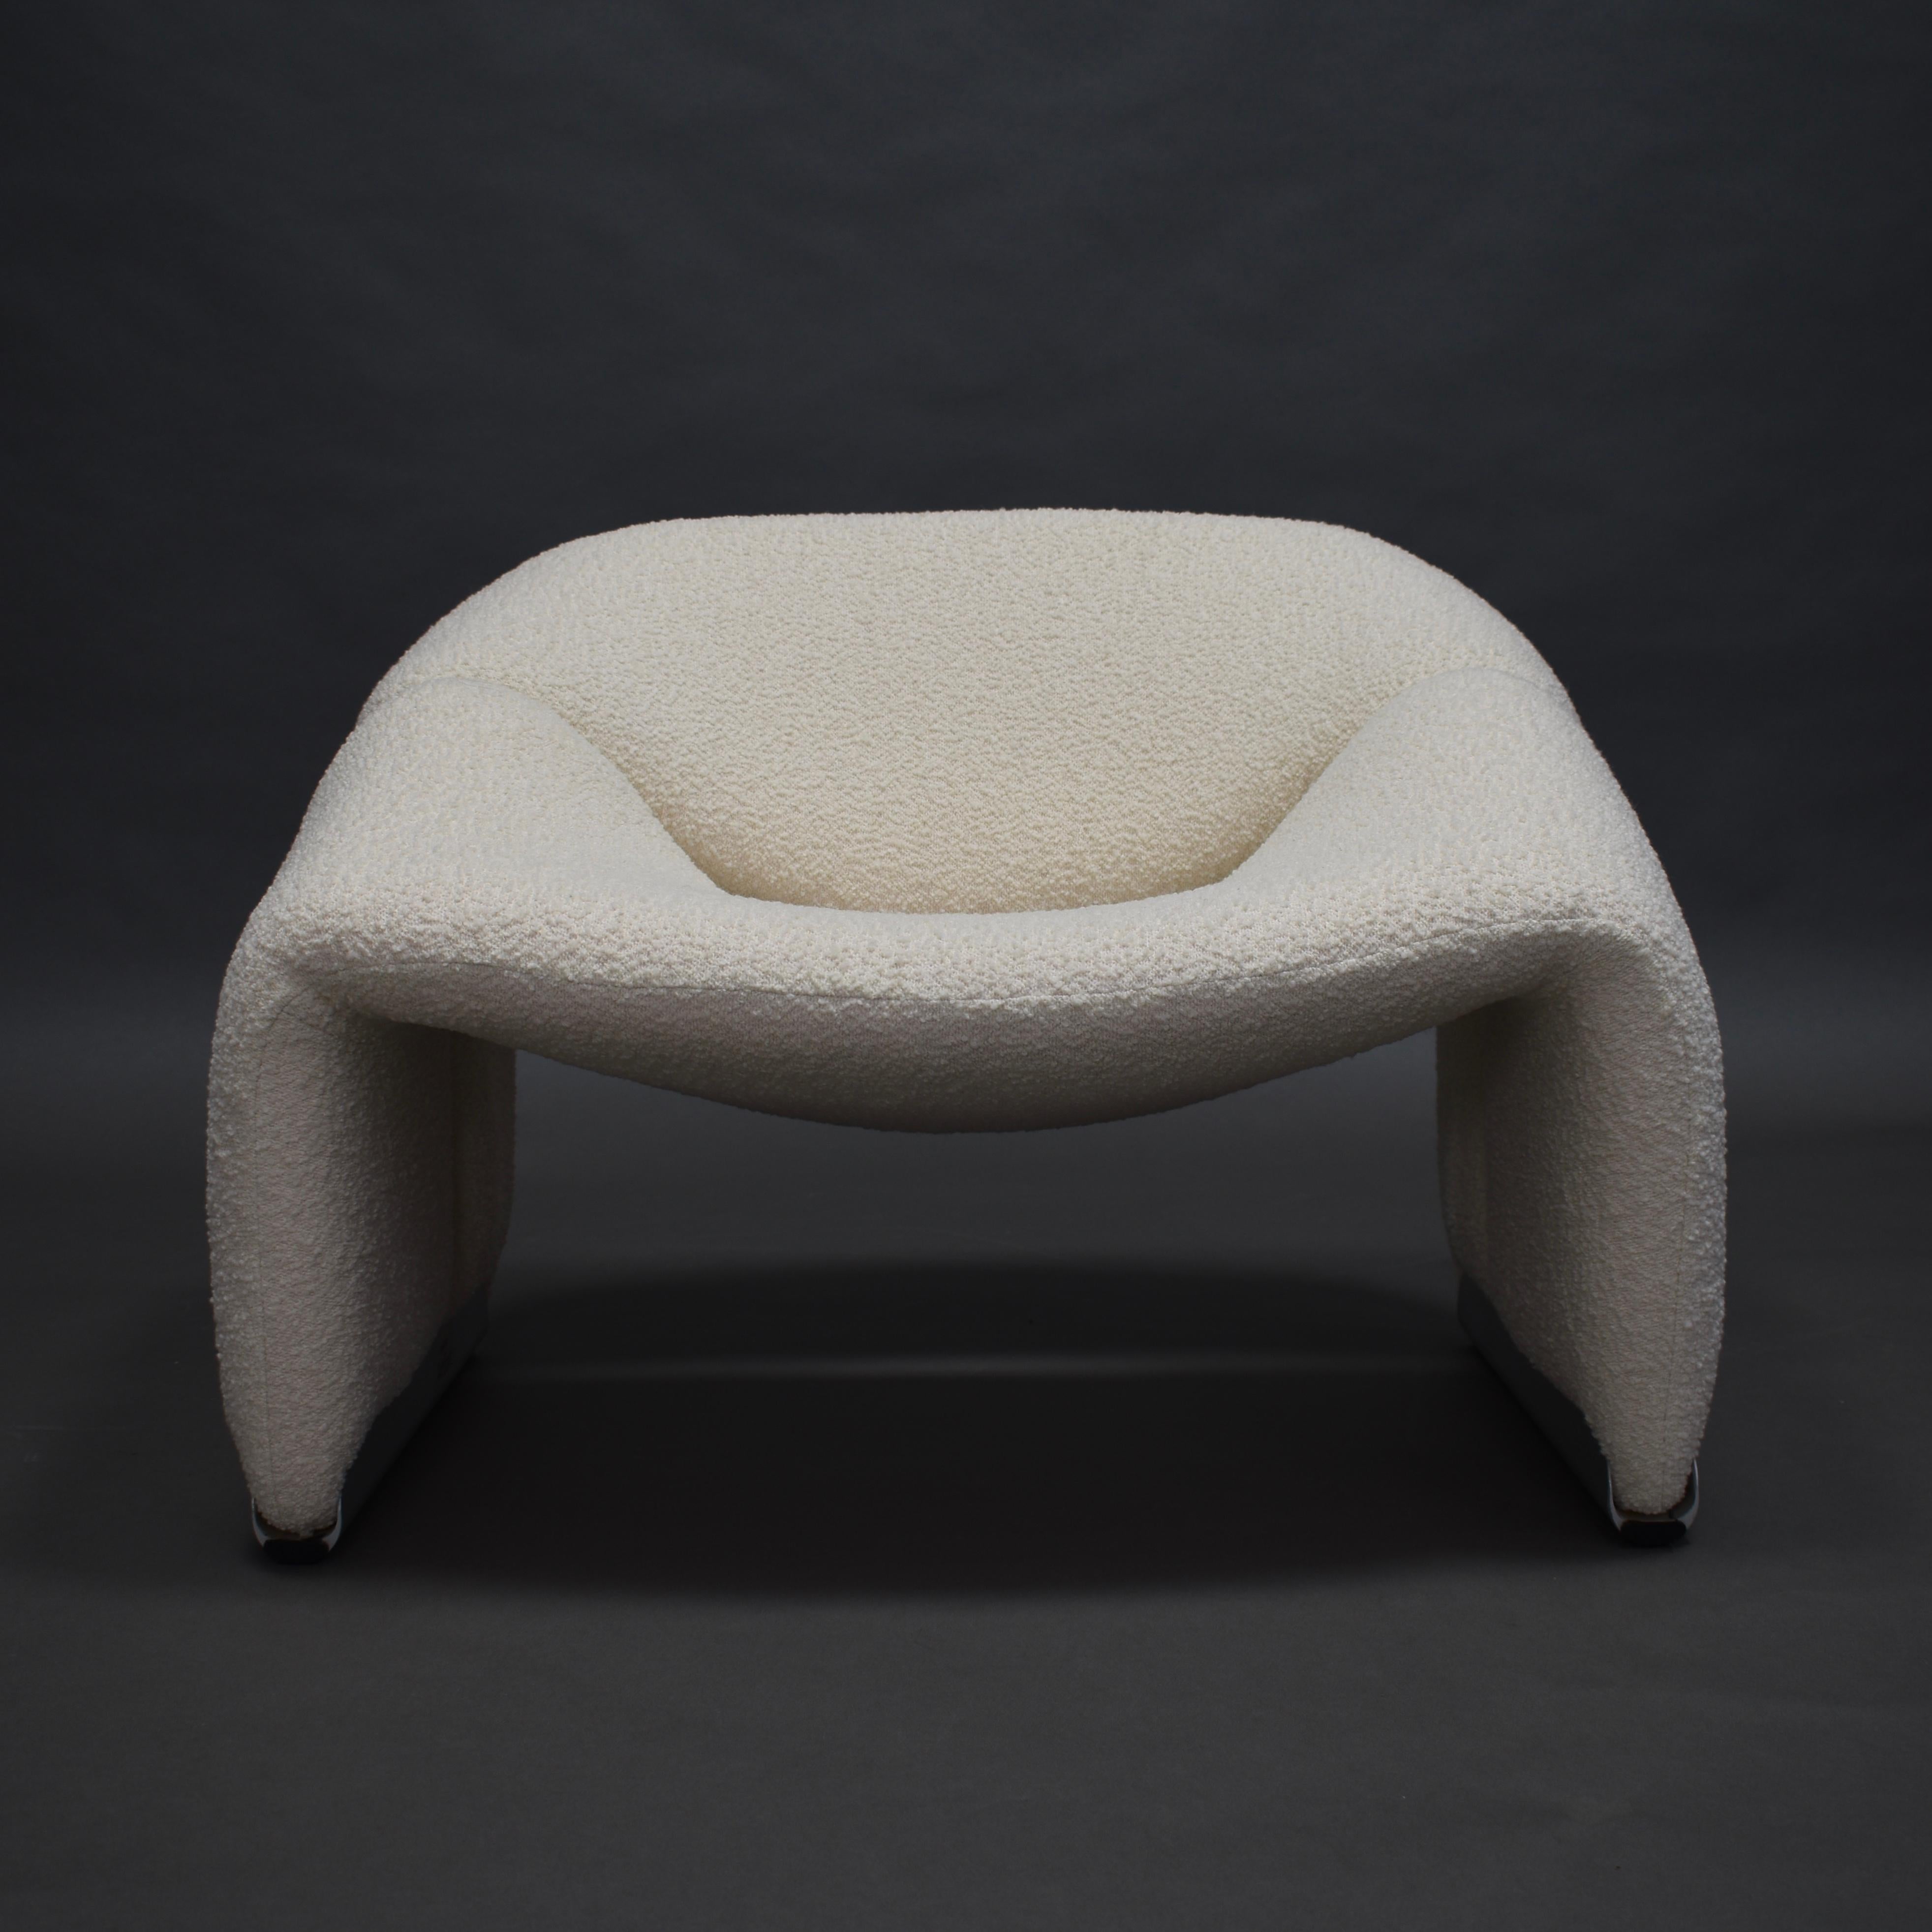 ‘Groovy’ F598 lounge chairs by Pierre Paulin for Artifort, Netherlands, 1972.

The chair has been reupholstered in a beautiful off-white bouclé wool fabric by Bisson Bruneel, (France). The cold foam interior has also been changed.

2 chairs